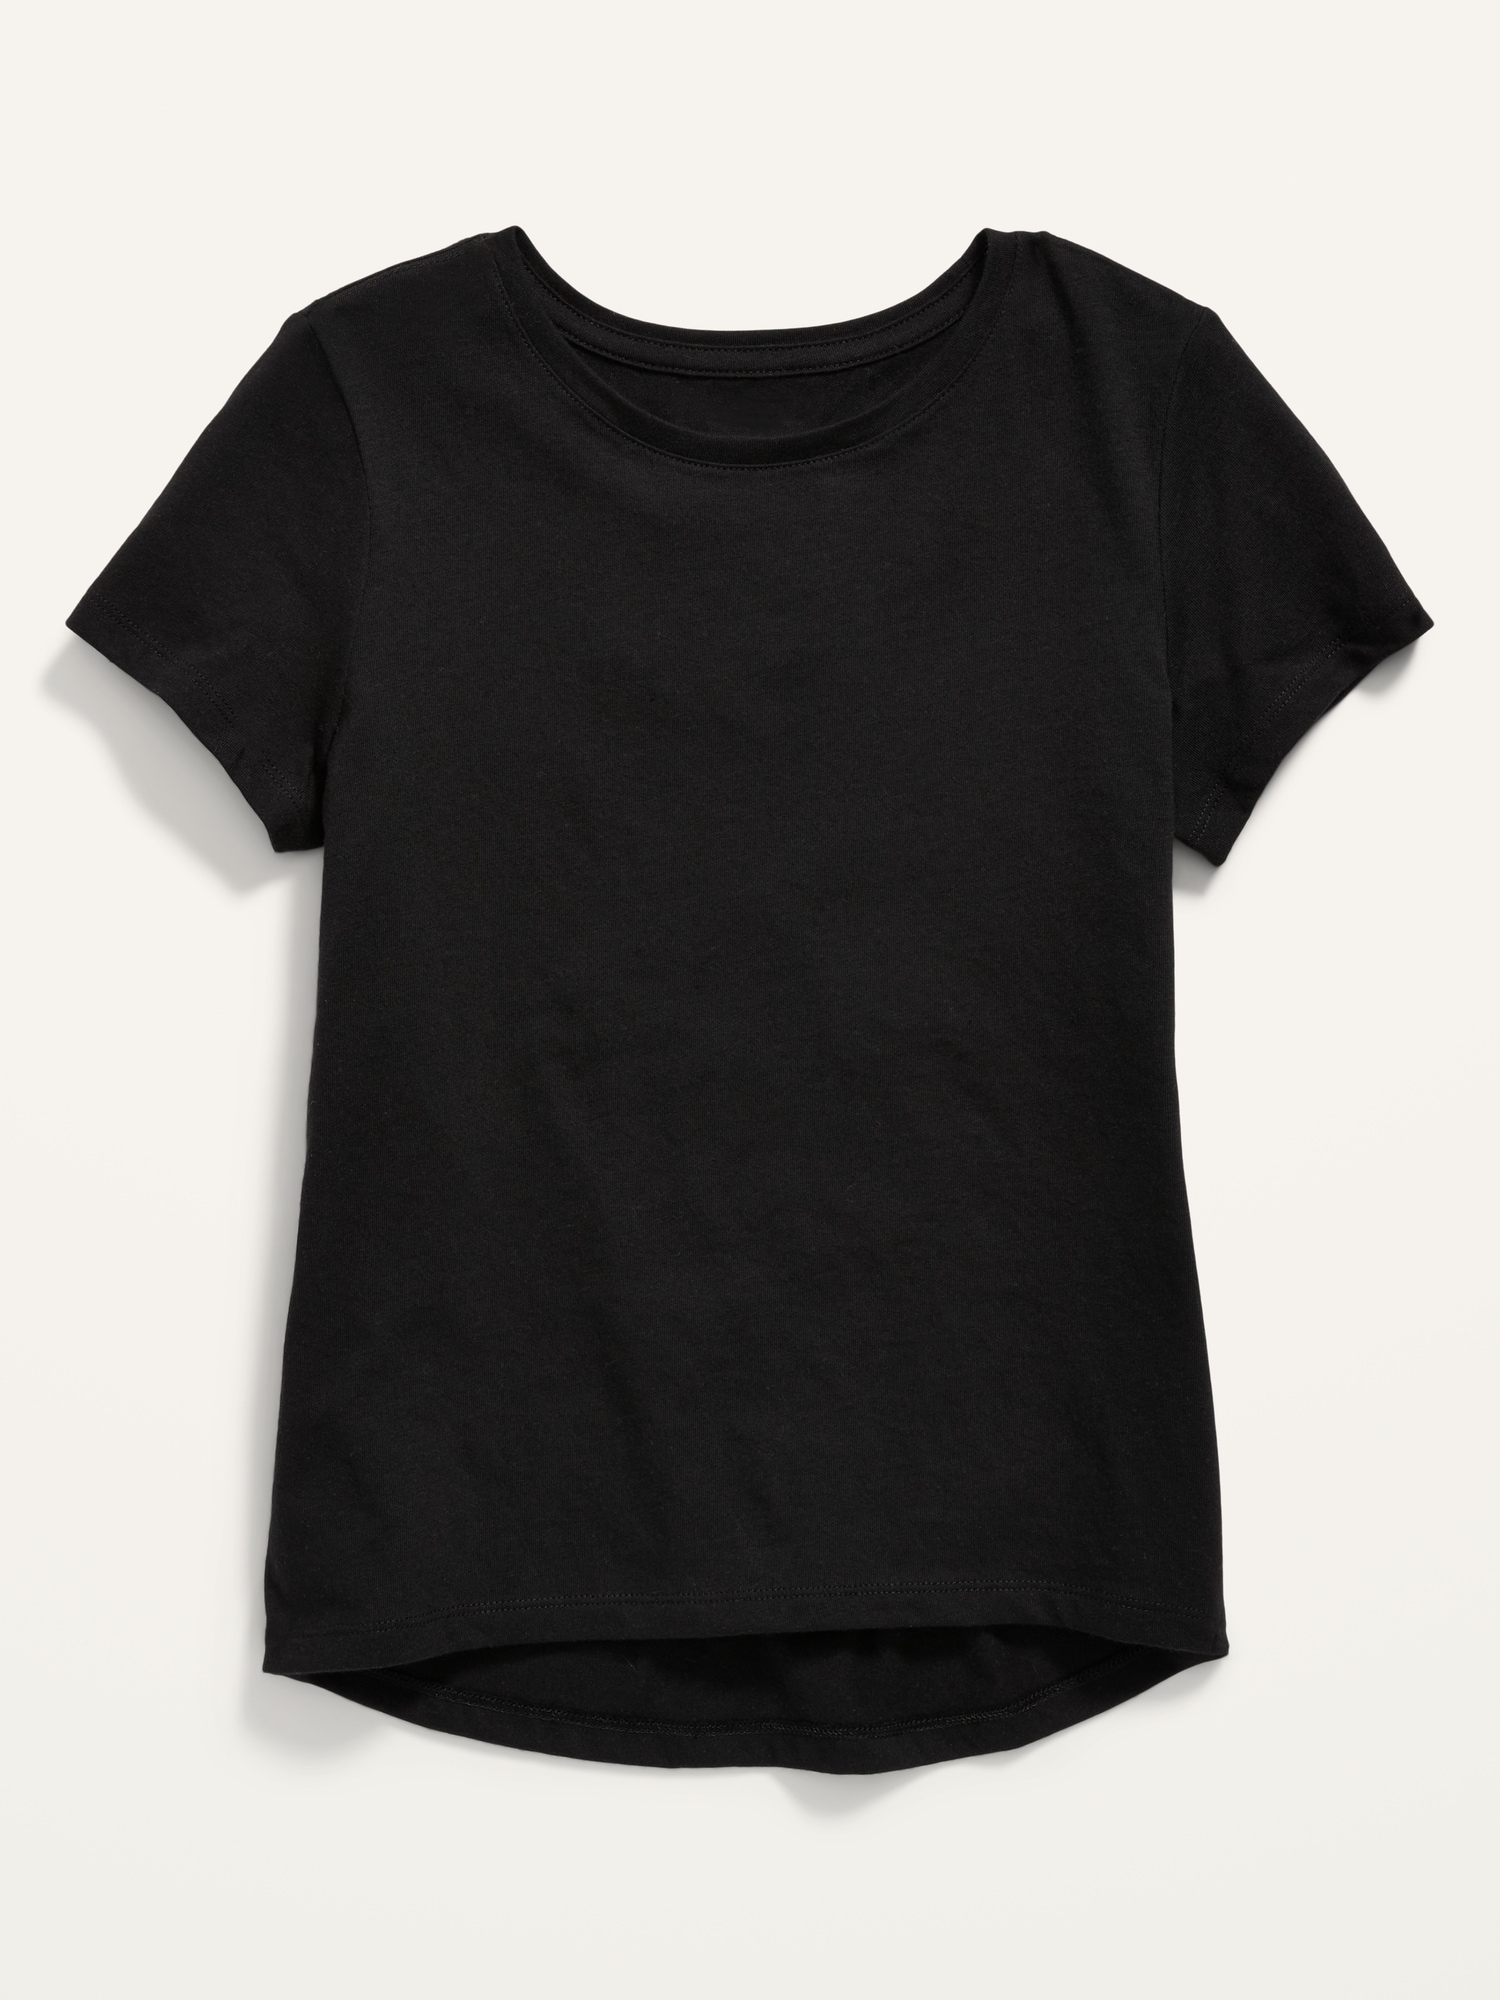 Short-Sleeve Softest Solid T-Shirt for Girls | Old Navy